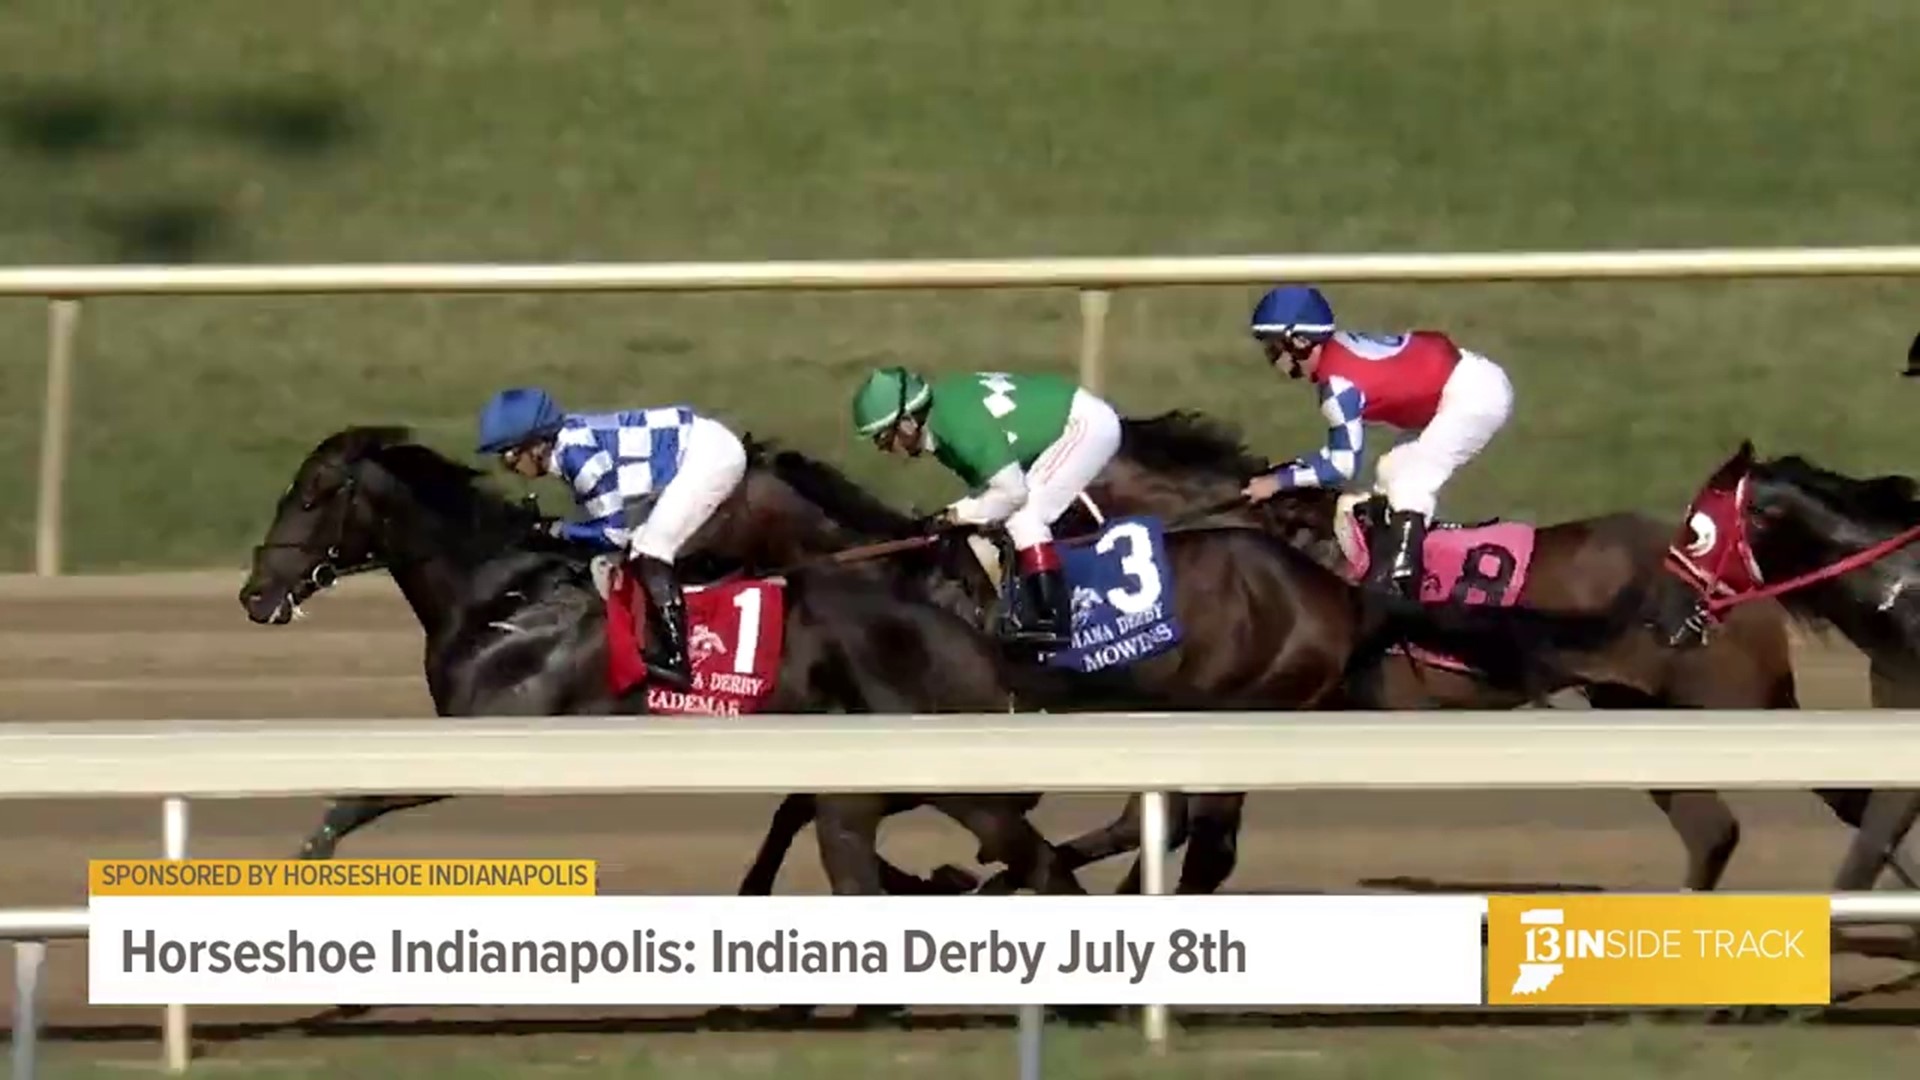 Indiana Derby is a fun day for the whole family. Live races, food, and a virtual reality experience. Join the fun July 8th at Horseshoe Indianapolis